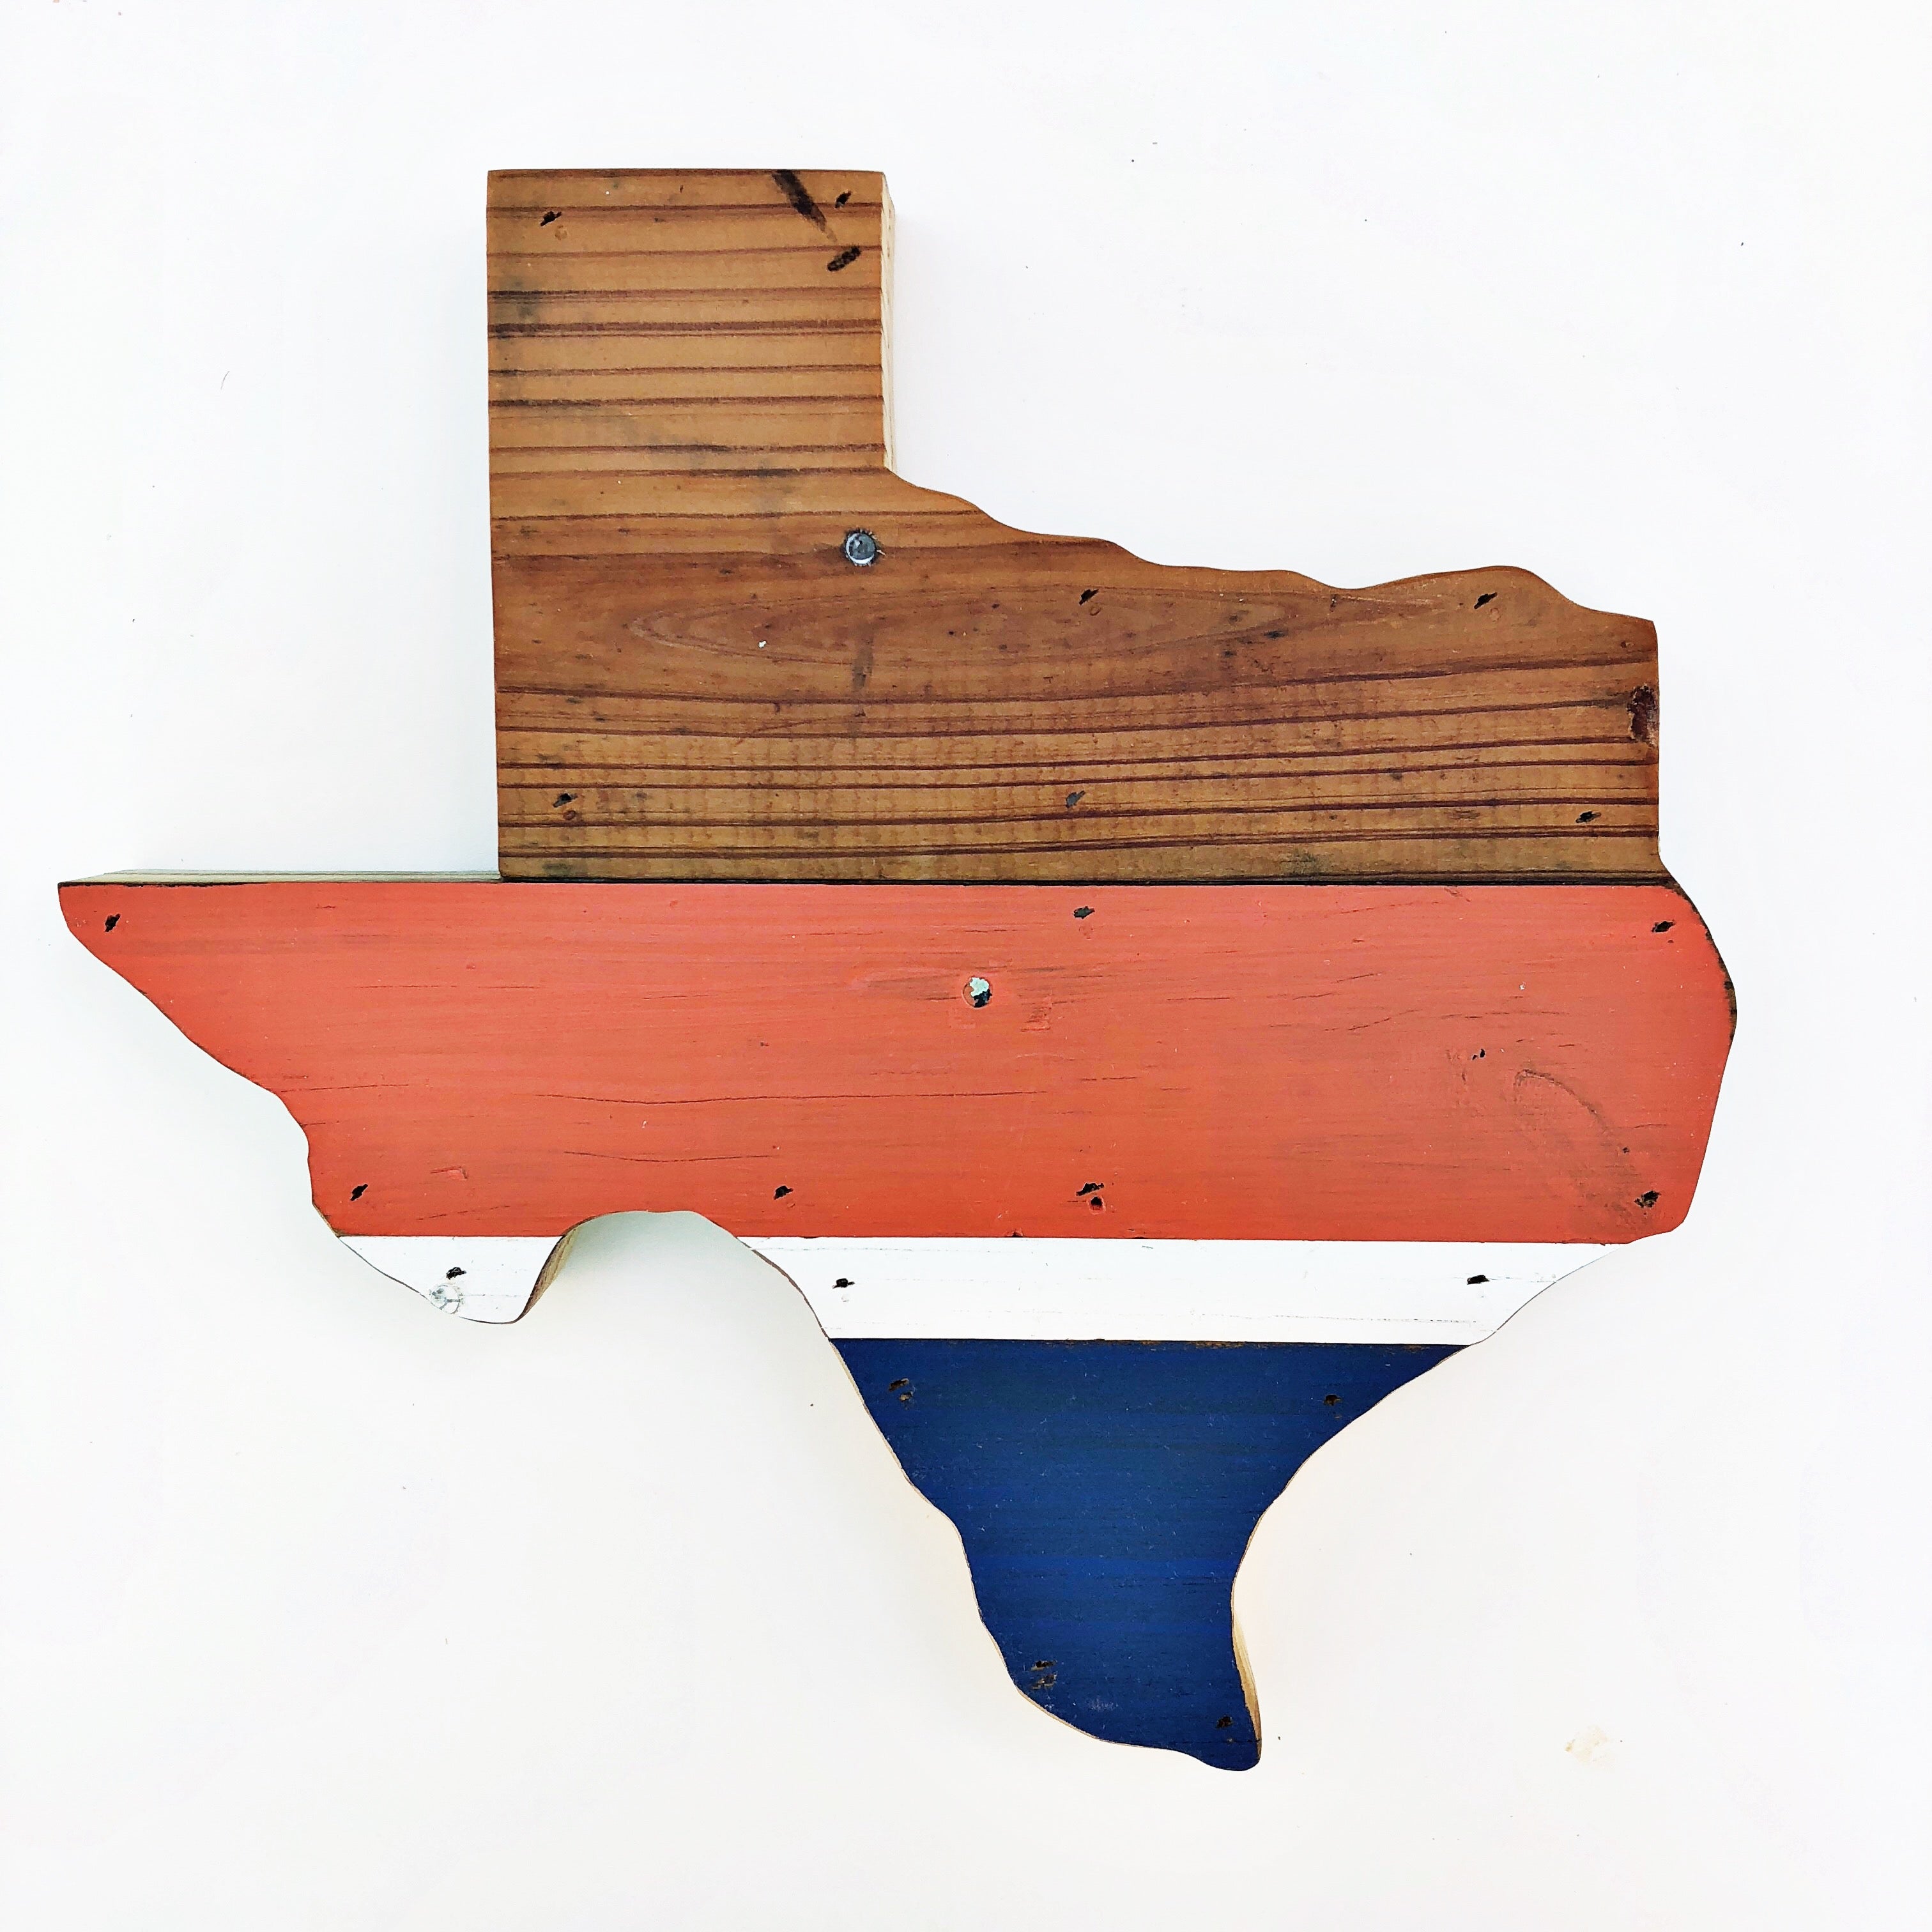 Team Spirit Texas Wall Hanging 12 in | Made to Order